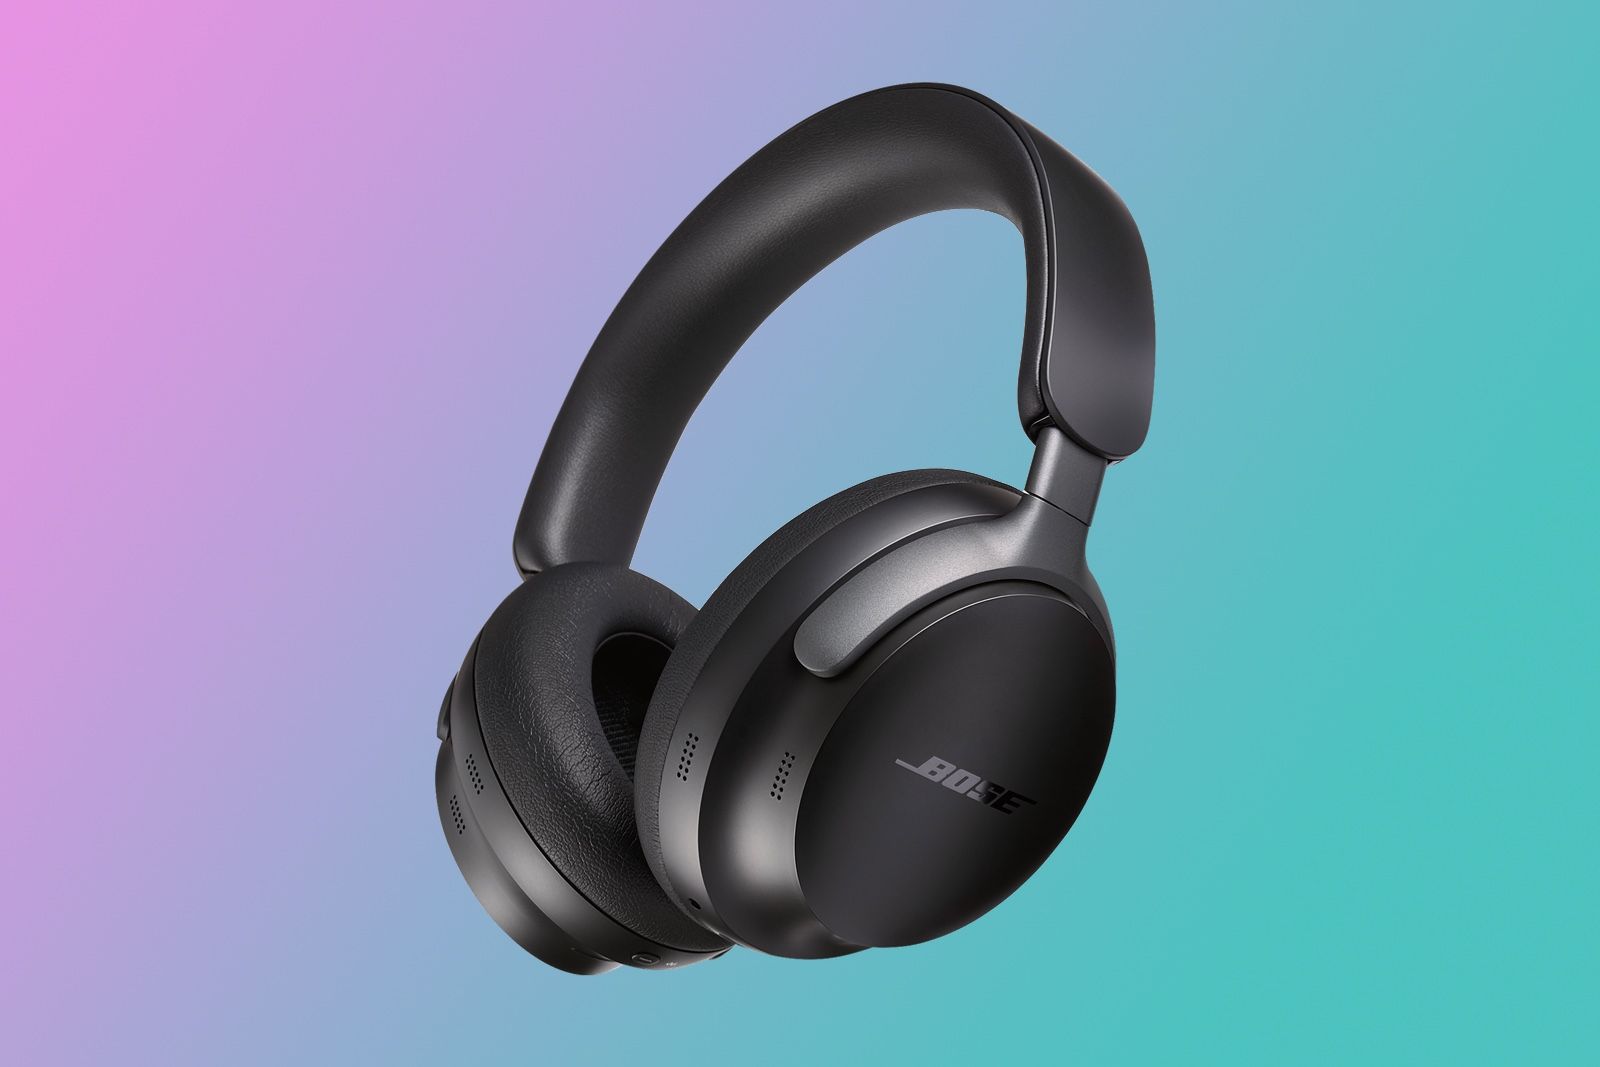 Bose QuietComfort Ultra headphones review: Moving in silence